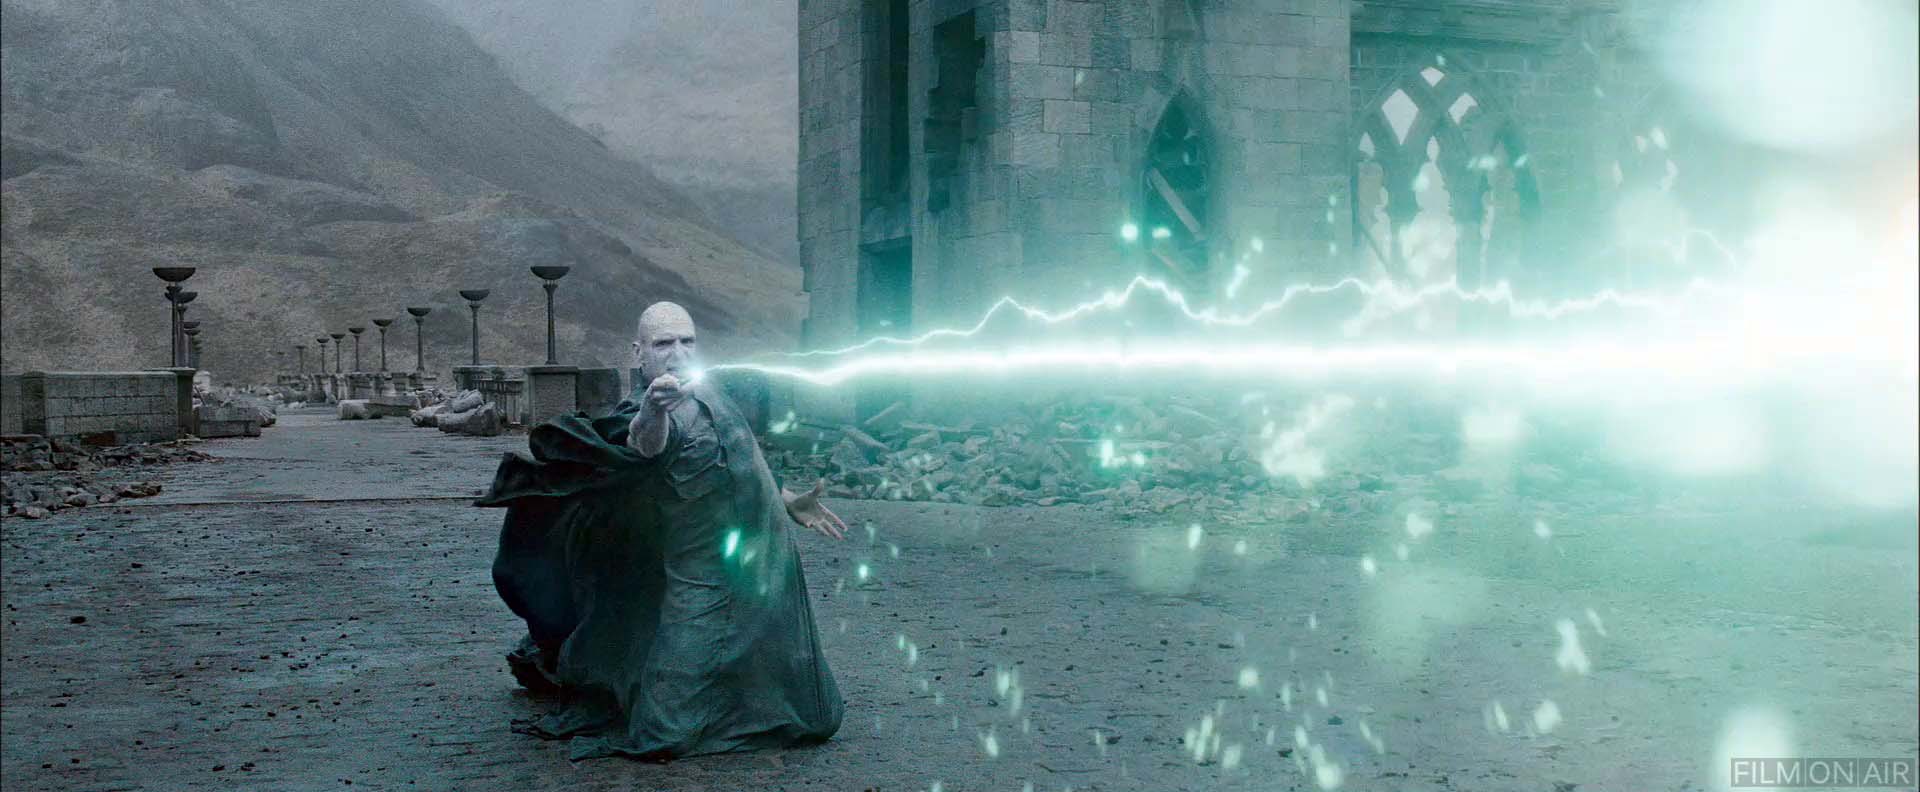 Lord Voldemort Wand Shot
 in Harry Potter and the Deathly Hallows Part 2 in Harry Potter and the Deathly Hallows Part 2